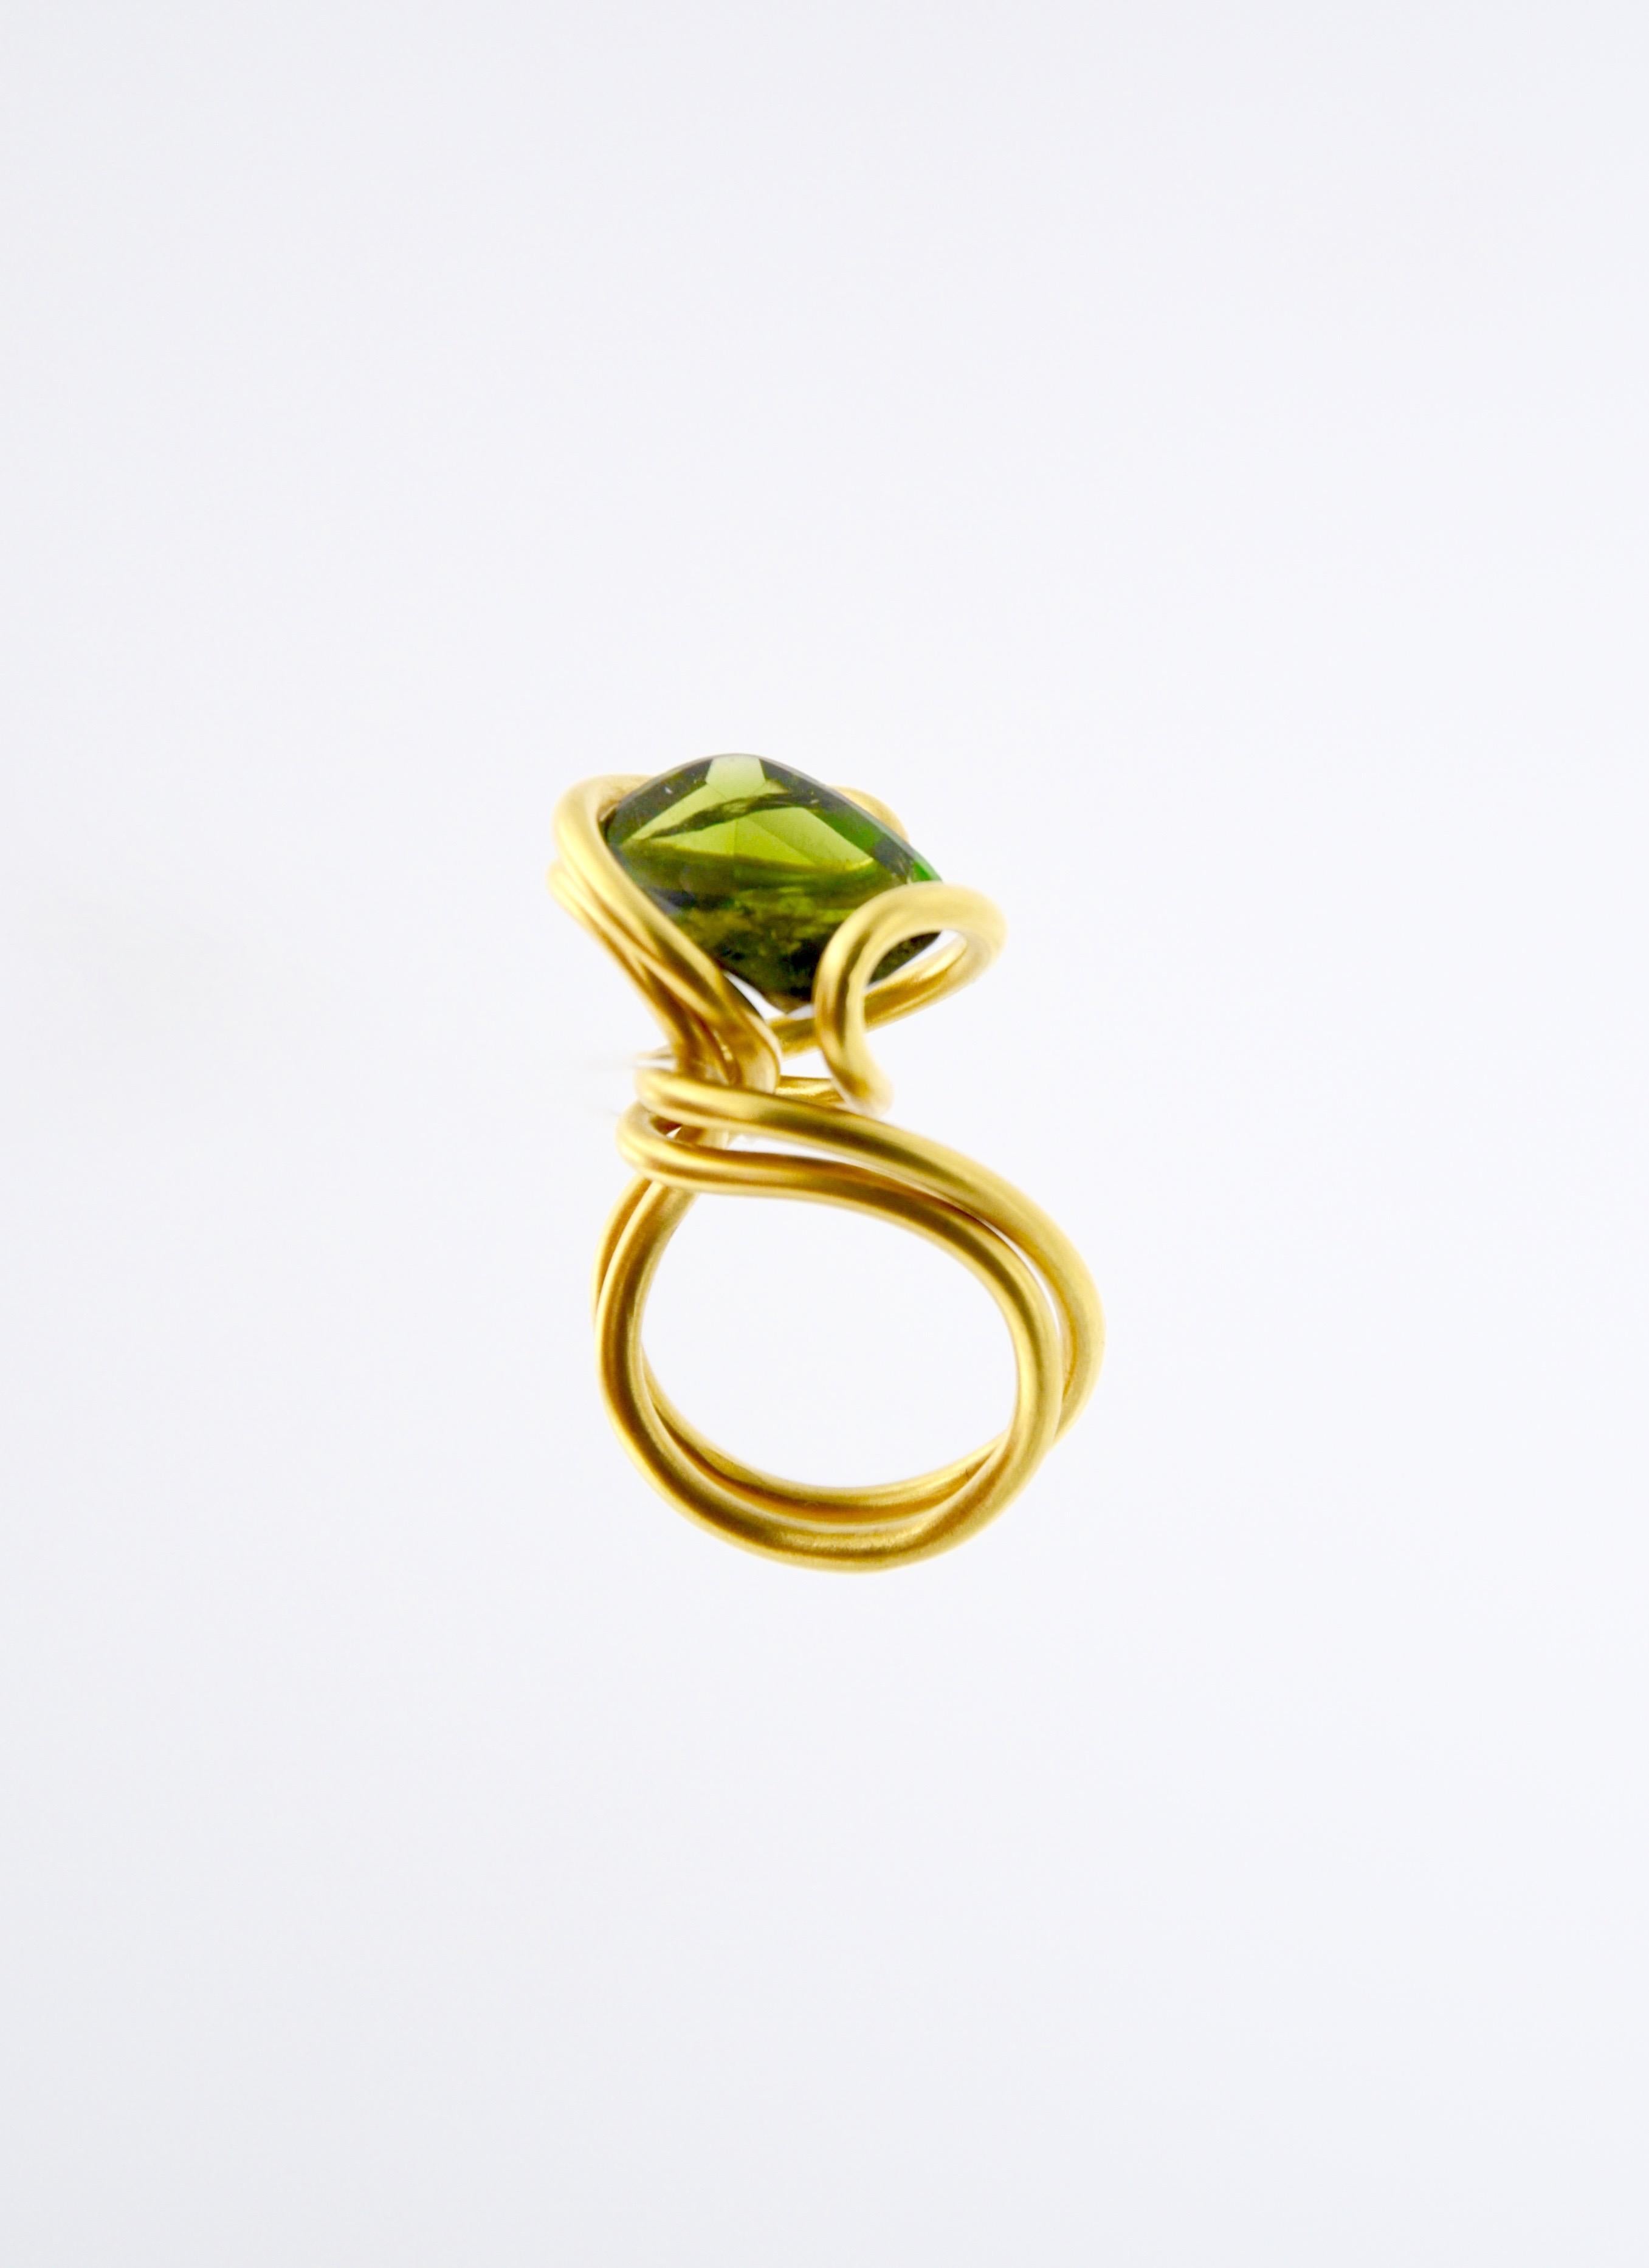 Contemporary Gold plated Silver rose Tourmaline  Cocktail Ring

Unique in its wavey, organic shape this golden ring holds a shiny rose tourmaline. 
Through light hitting the gemstone from 360 degrees it shines in all its brightness in a very intense